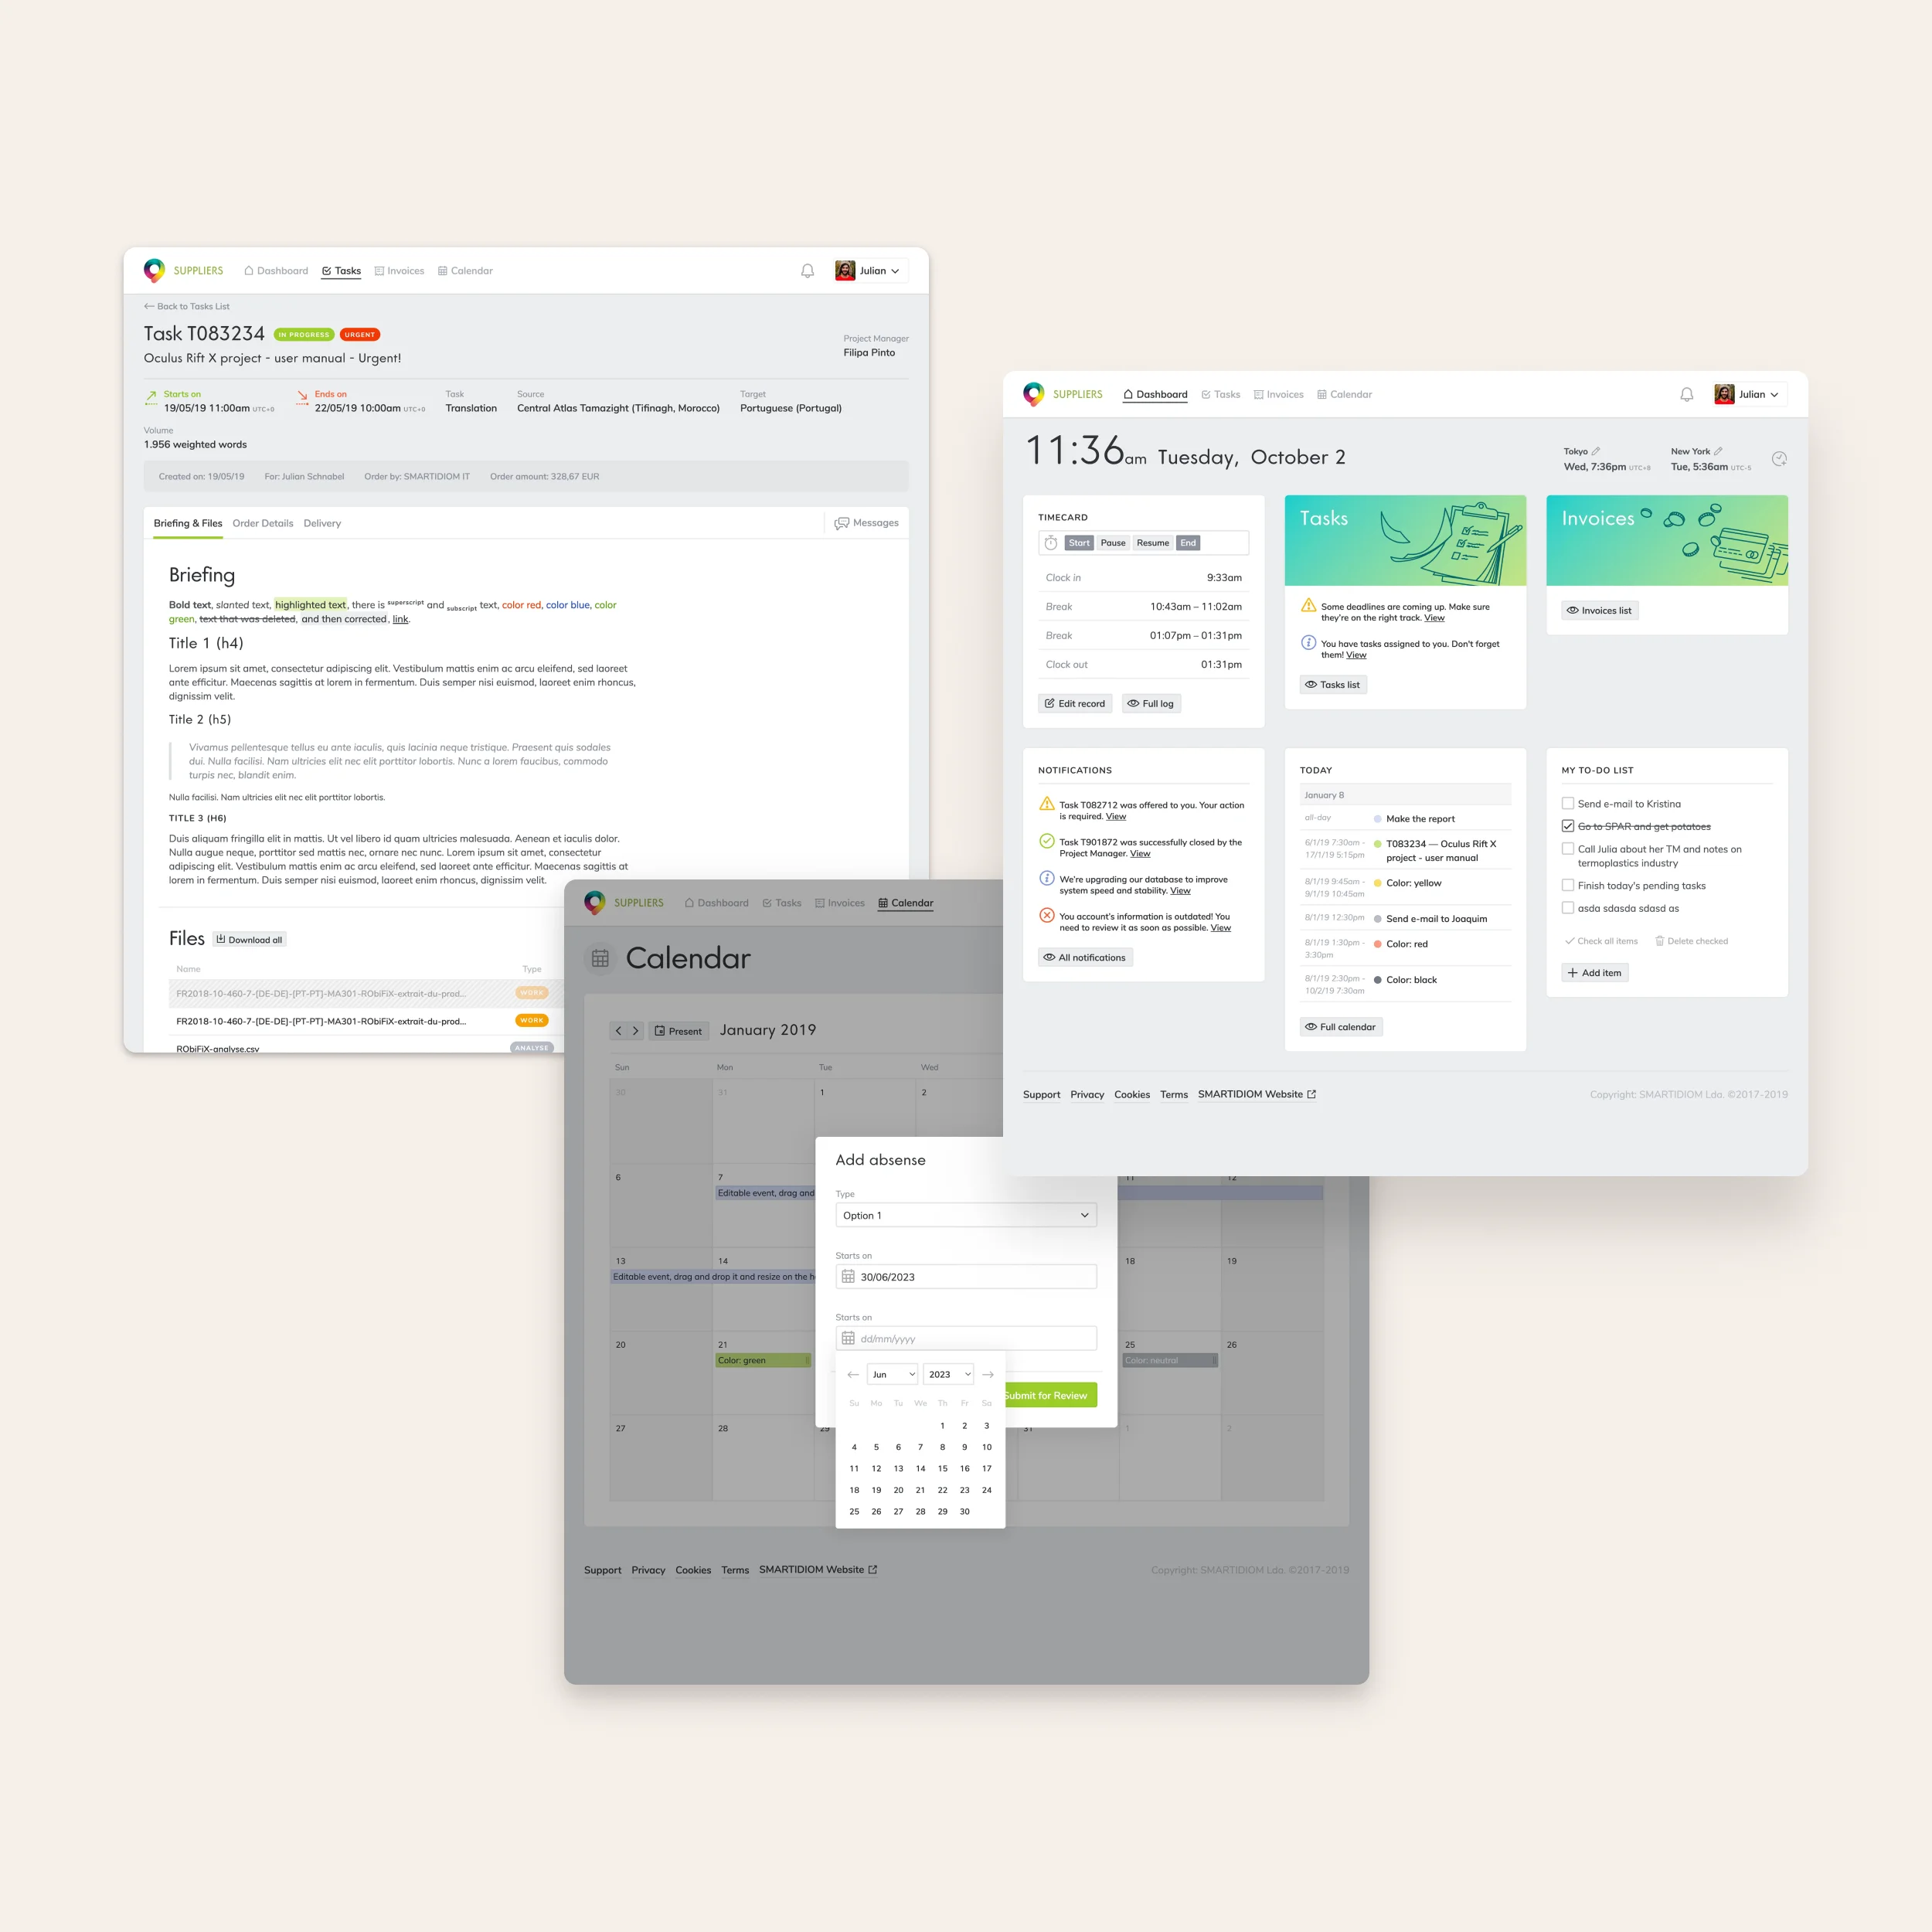 3 screenshots of a task management app displaying a calendar, a dashboard with tasks, calendars, and other productivity utilities, and also what appears to be a task sheet with more complex details of what needs to be done. The designs are primarily whiteish and grayish, with some brand colors in lime green and some other cooler tones.